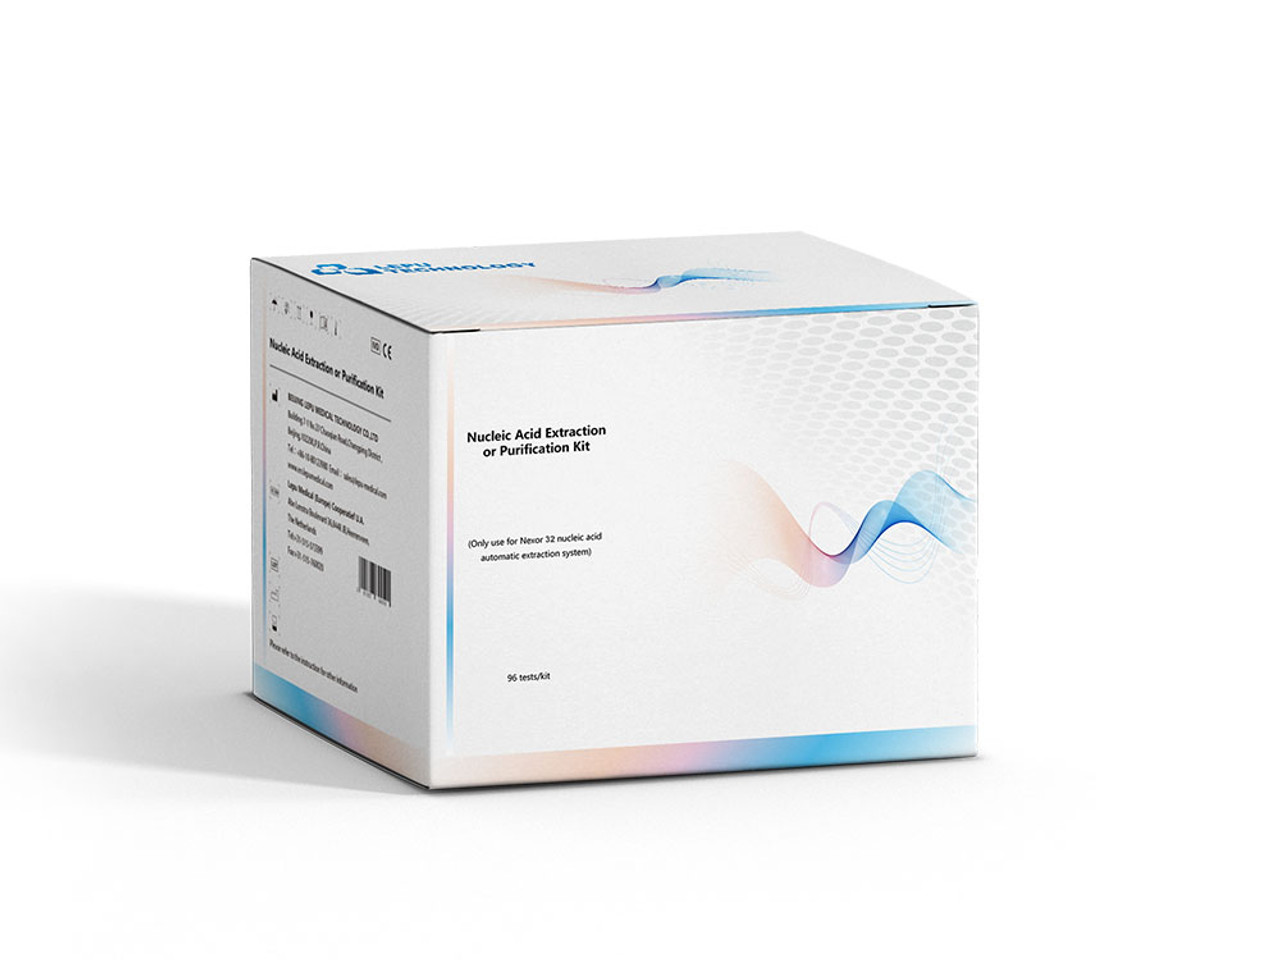 Nucleic Acid Extraction or Purification Kit